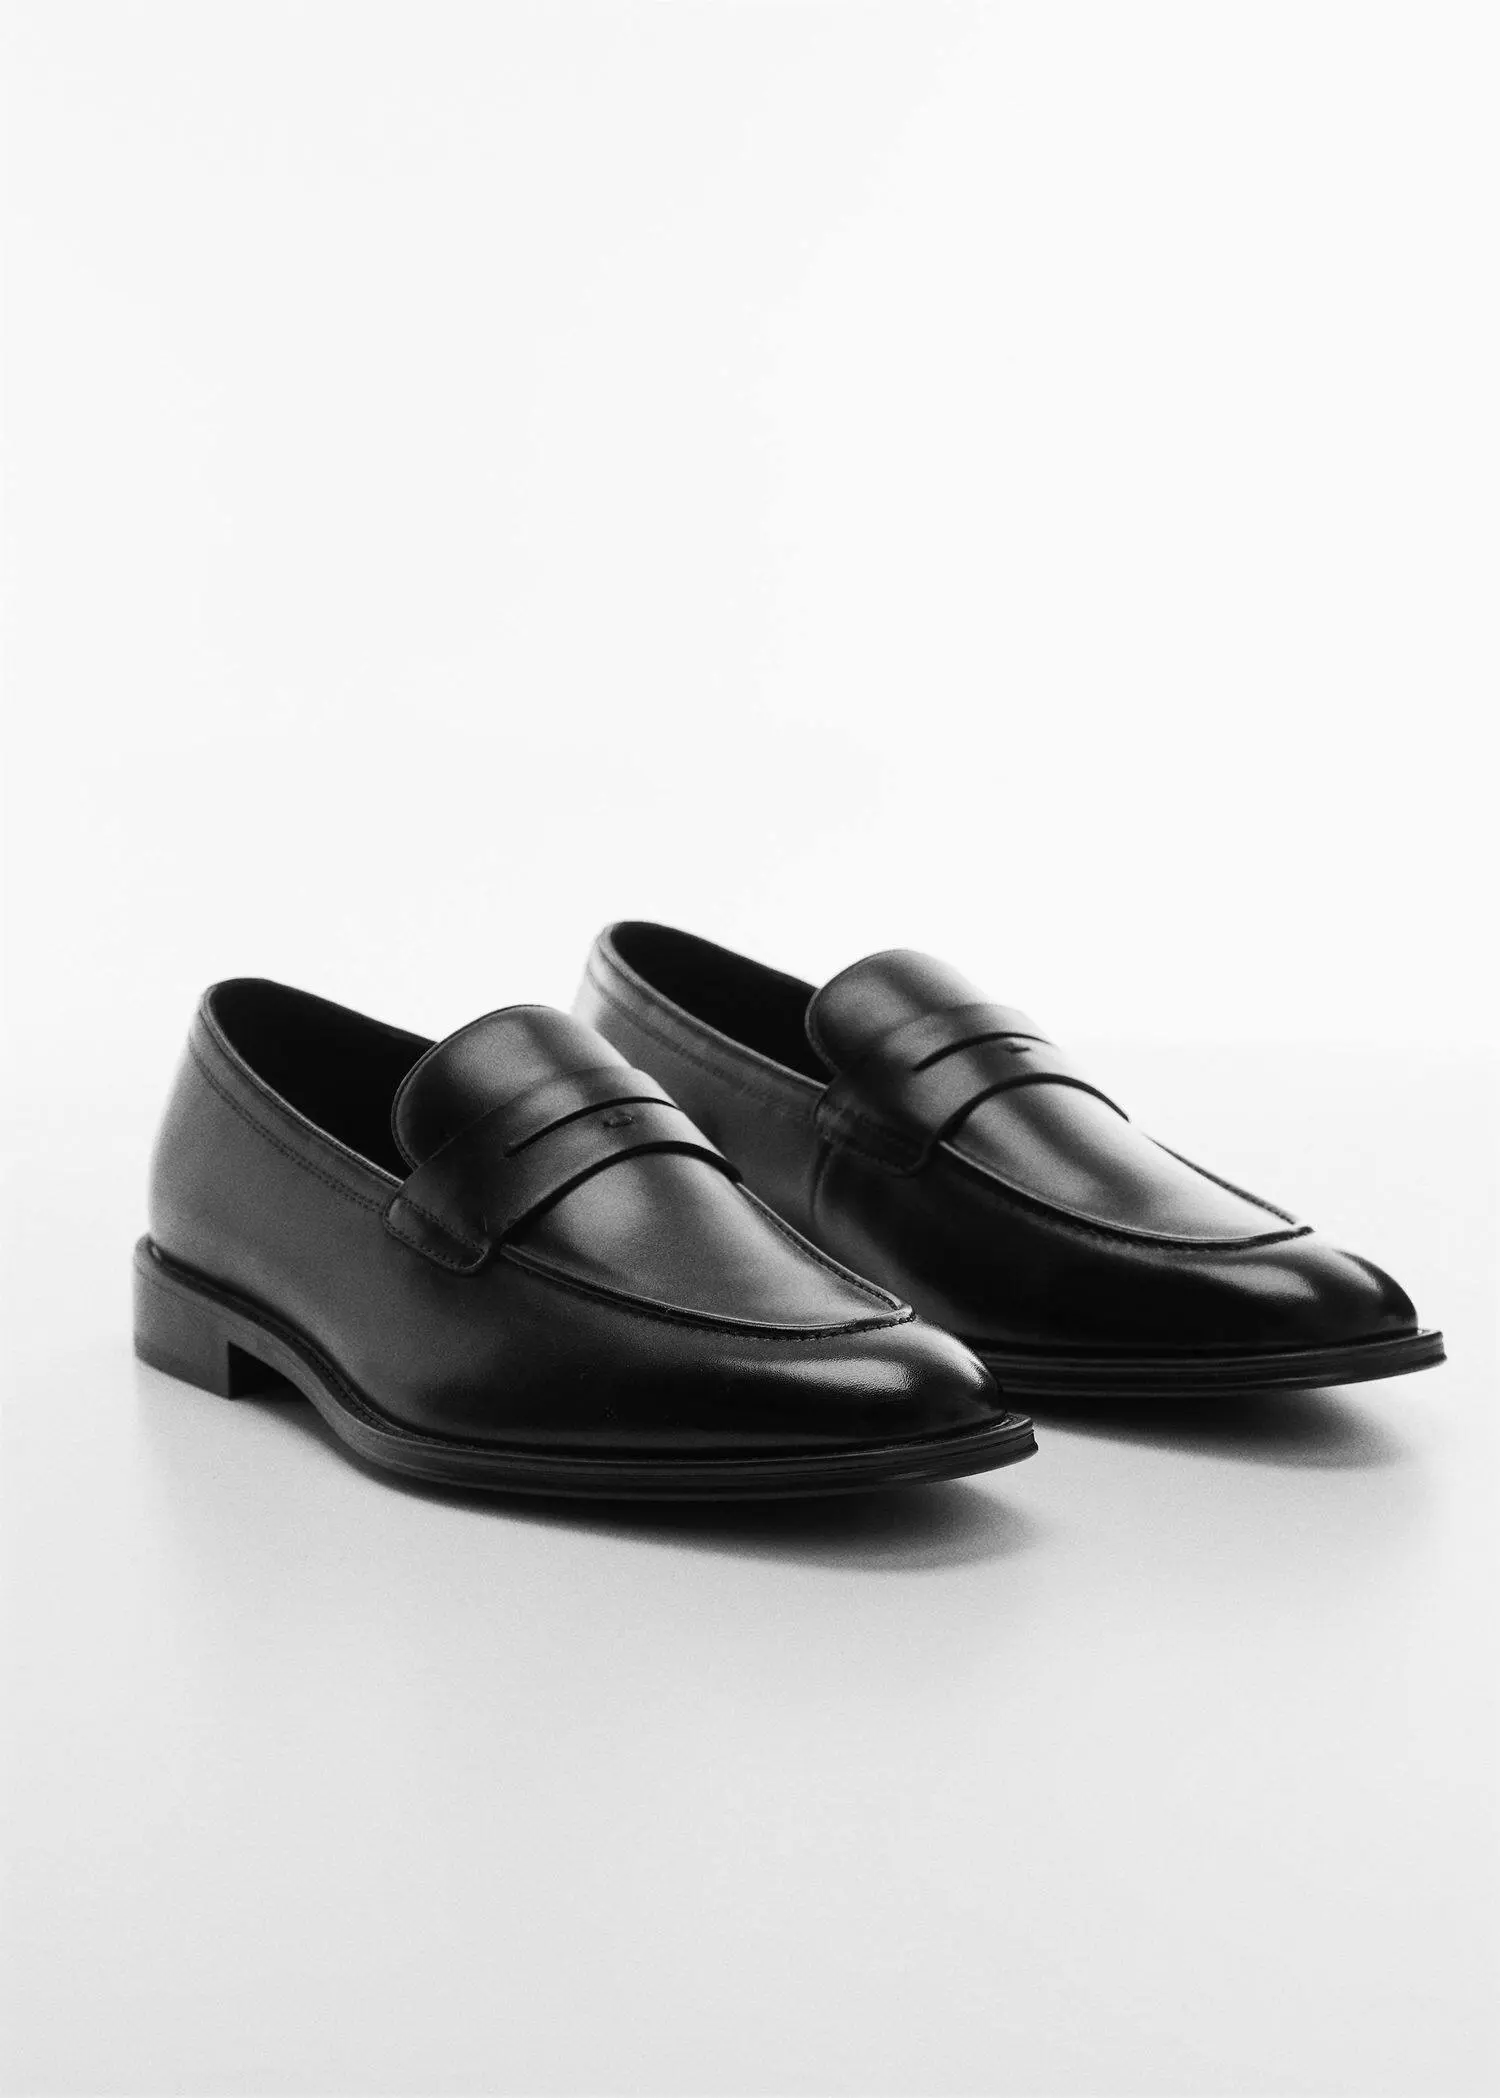 Mango Aged-leather loafers. a pair of black loafers on a white surface. 